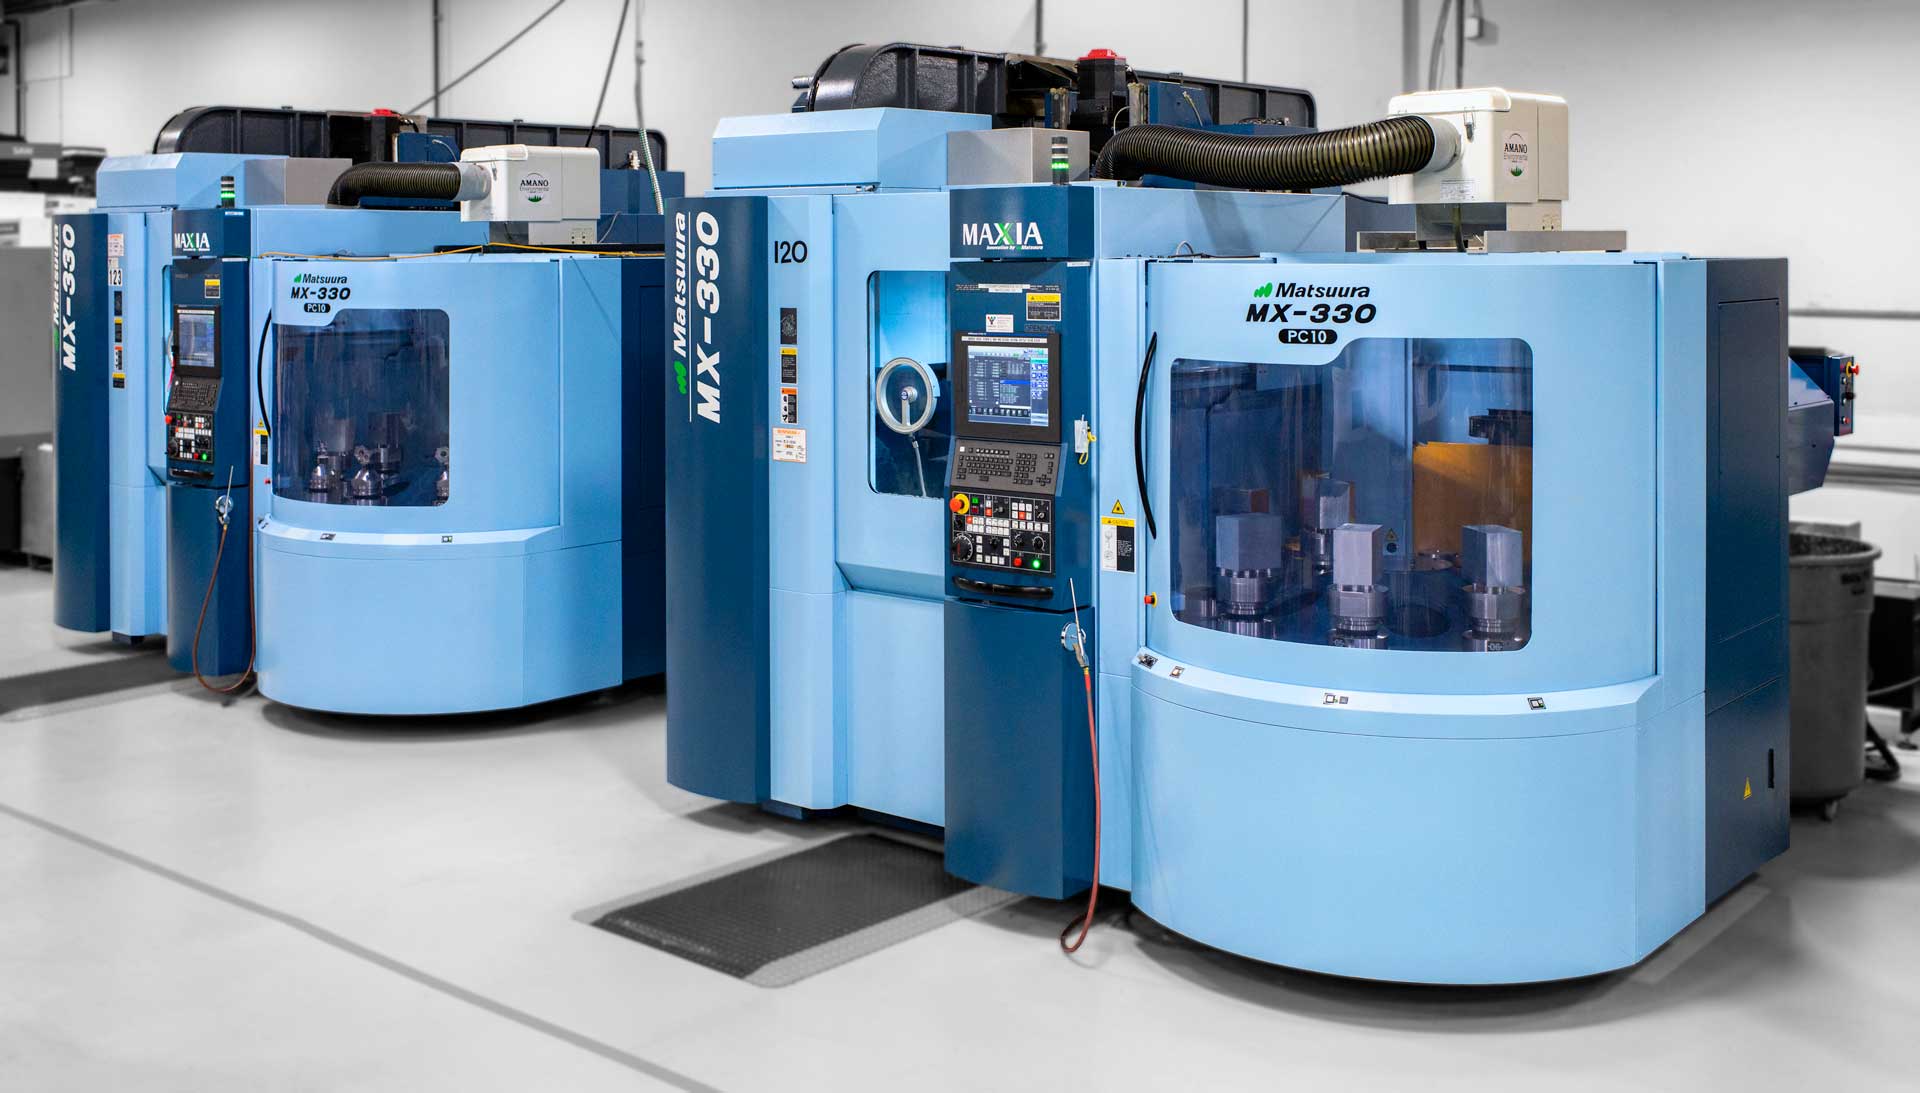 Two Matsuura MX-330 machines side by side